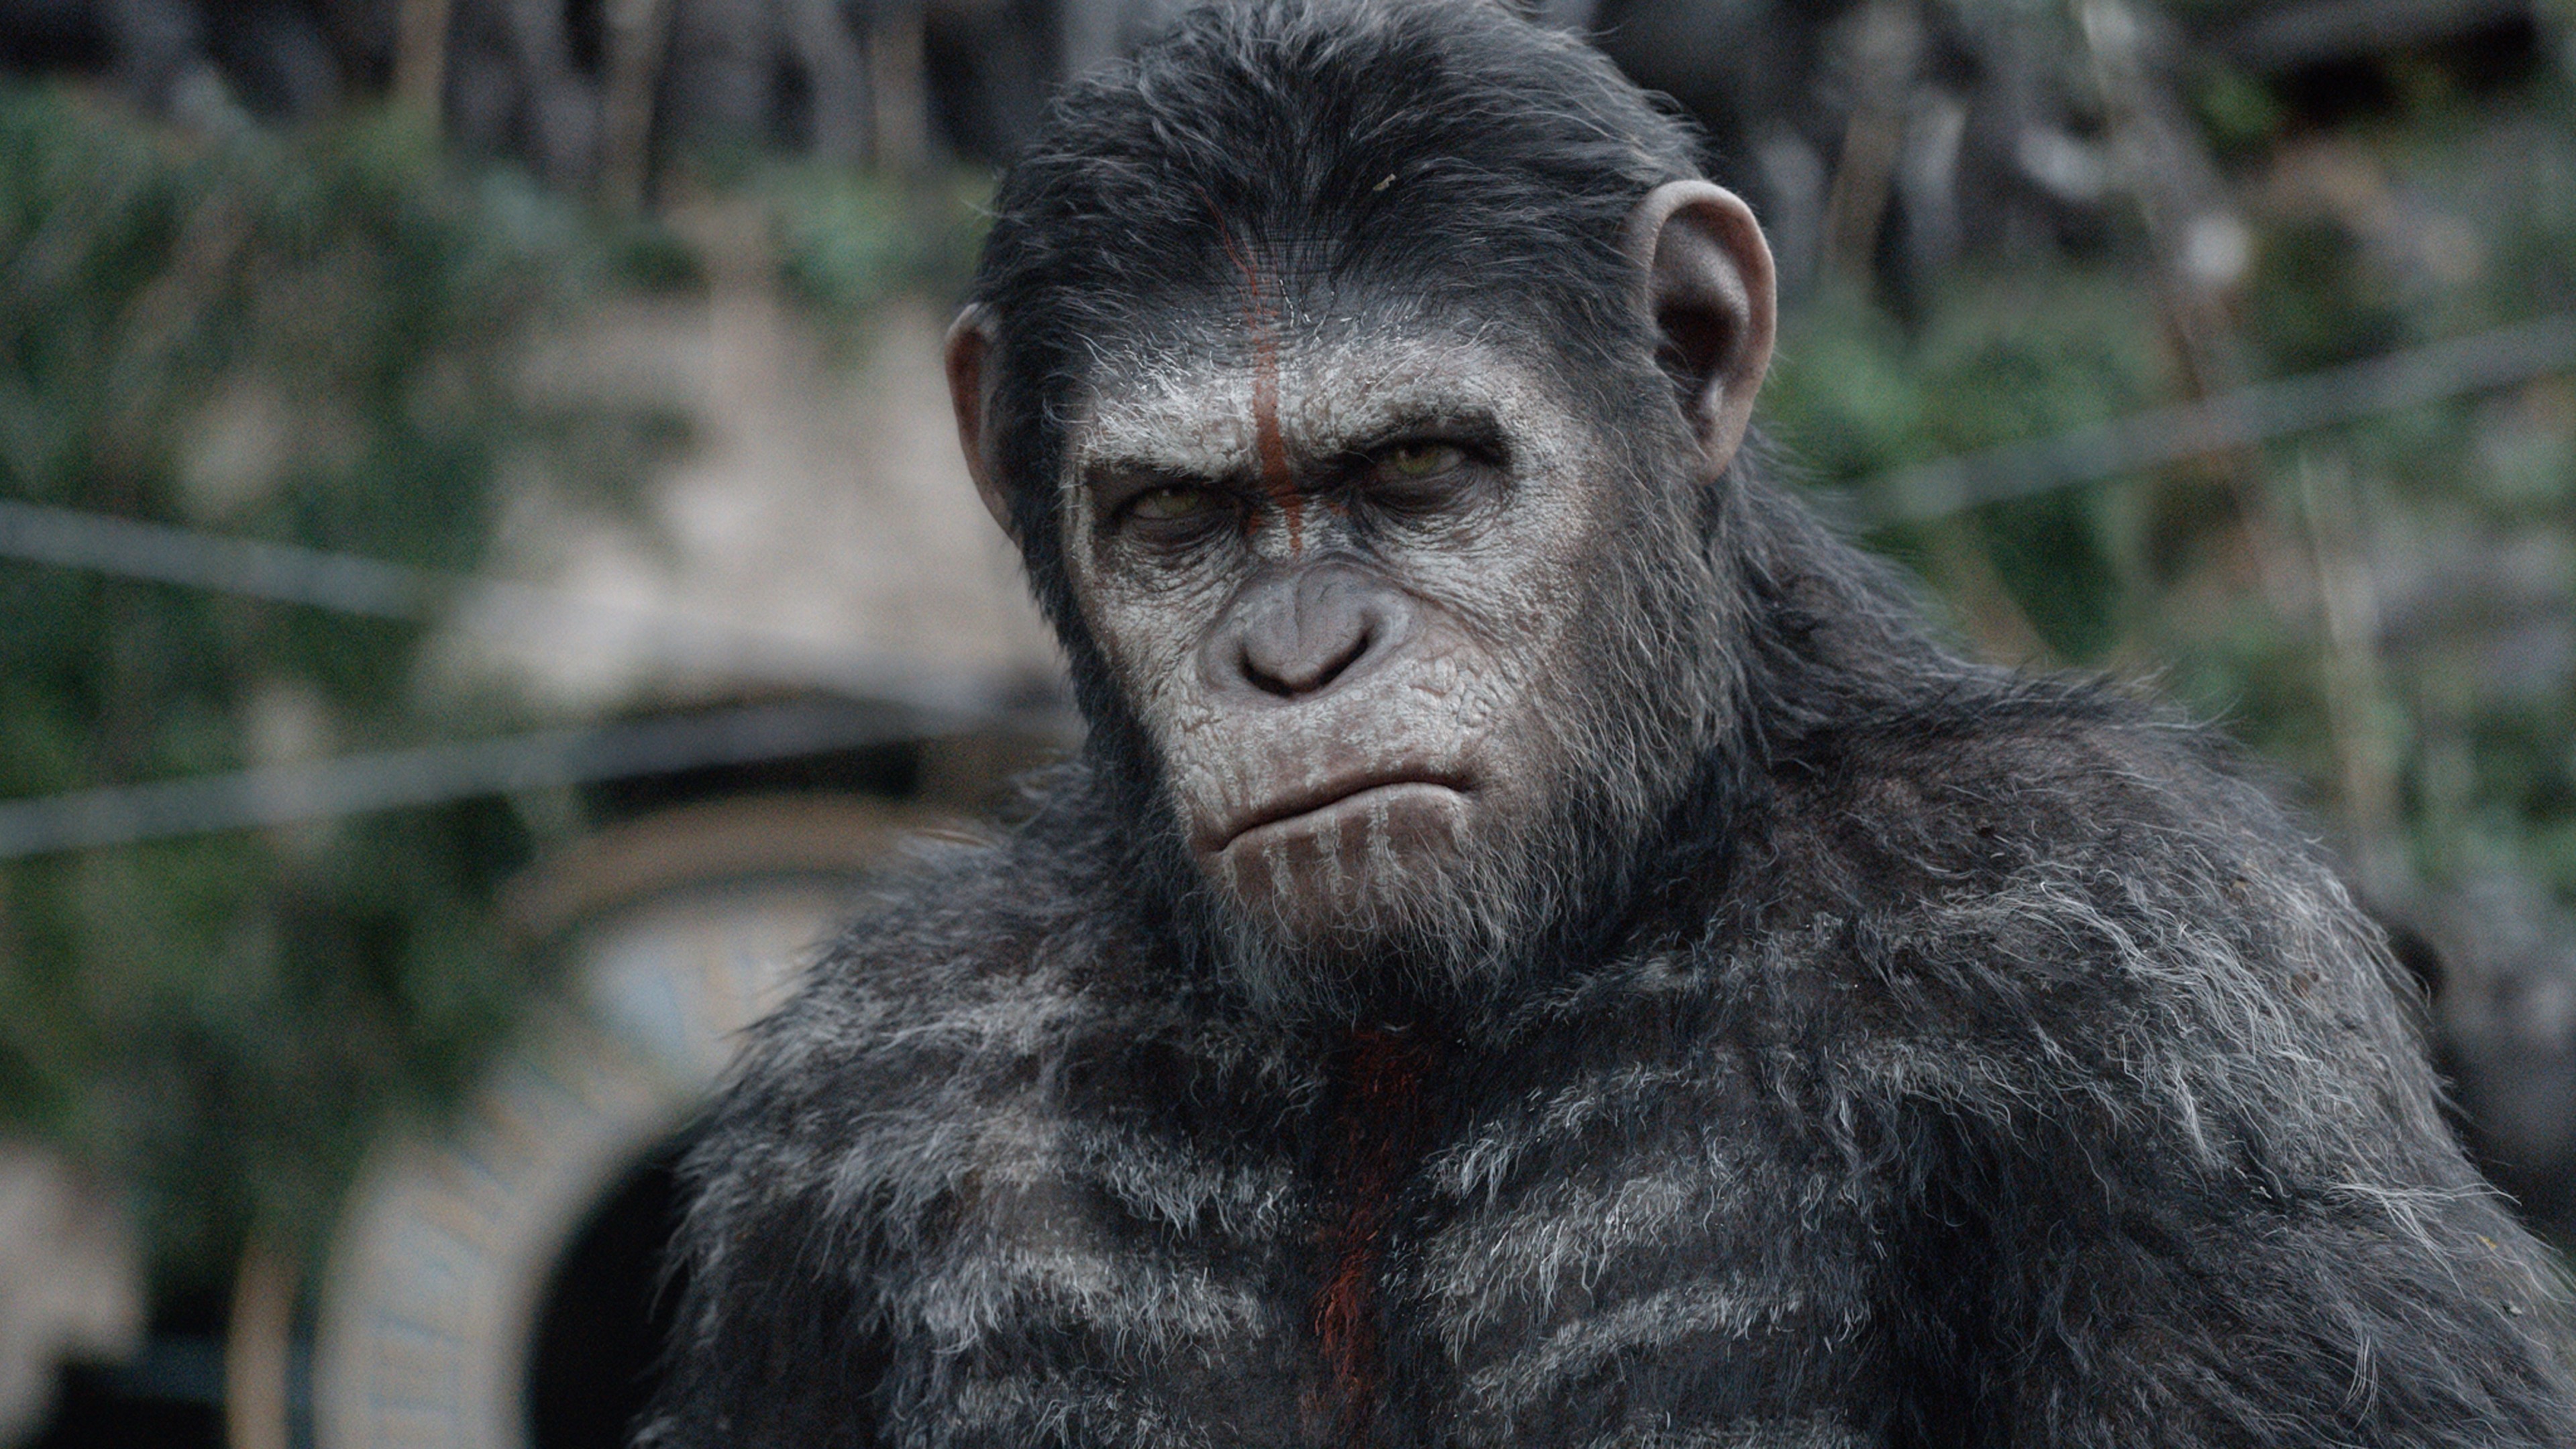 Wallpaper War for the Planet of the Apes, 4k, 5k, Movies